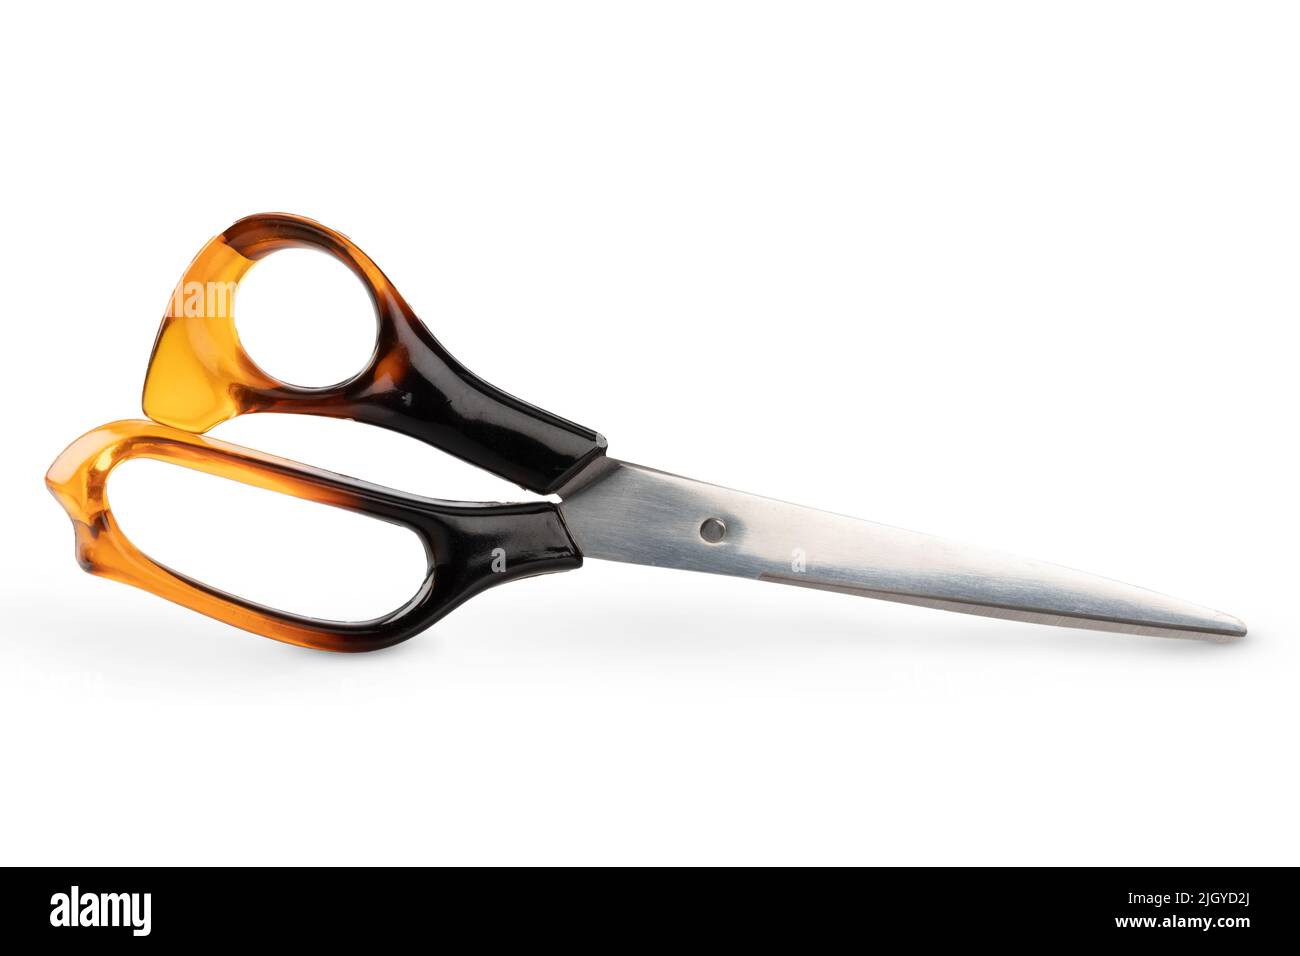 Pair of closed scissors isolated on white background Stock Photo